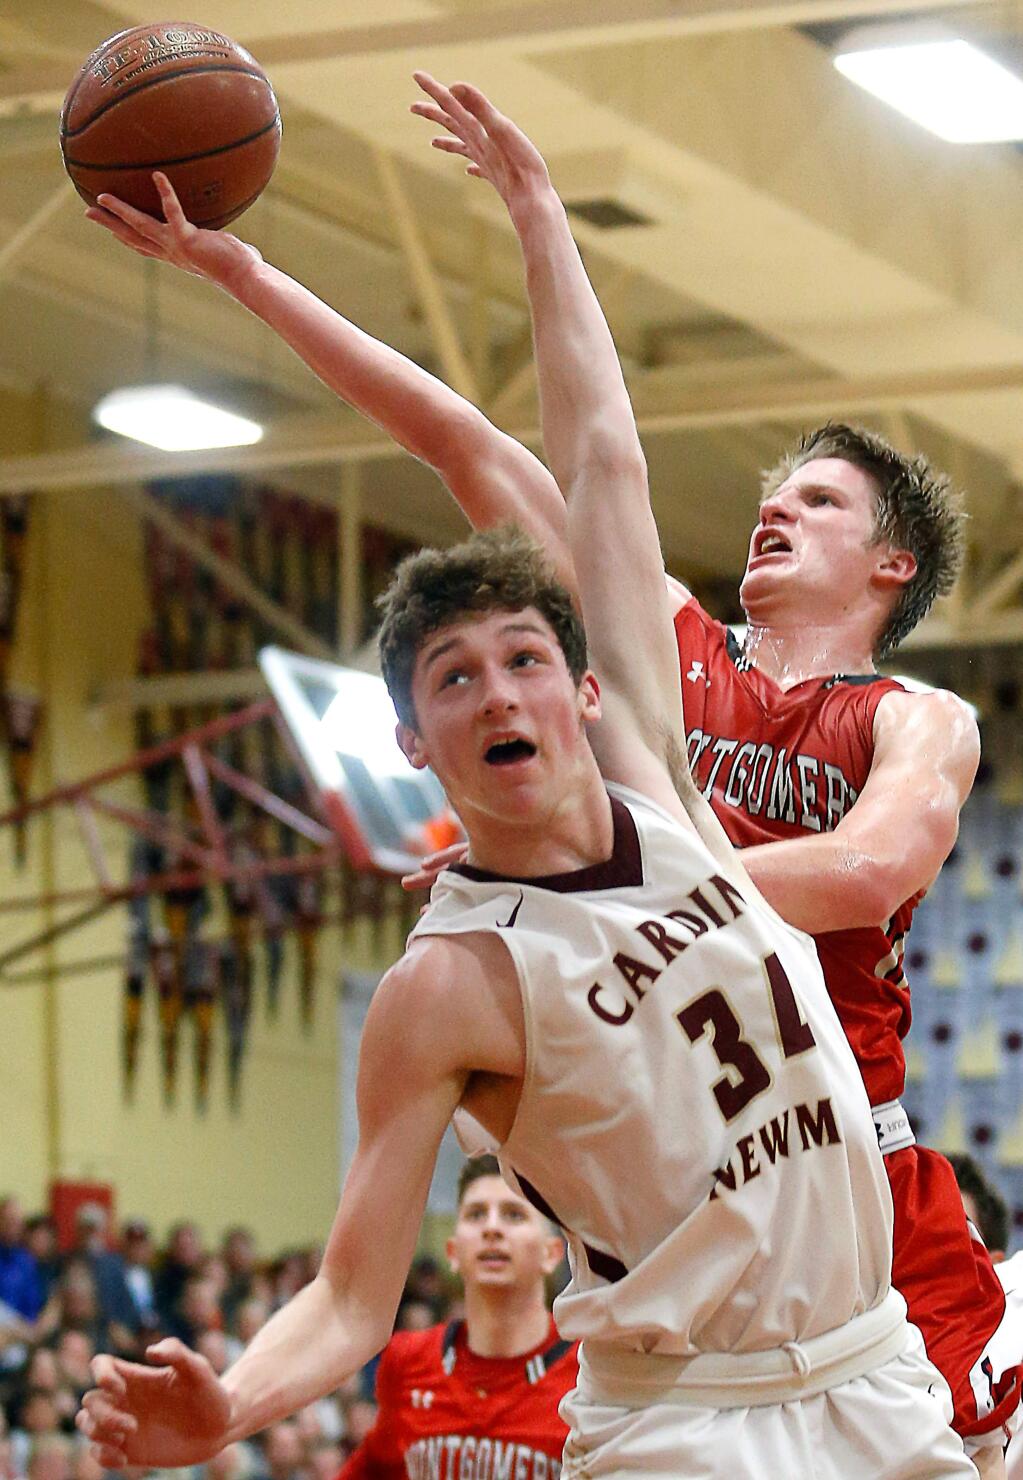 Montgomery's Evan Poulsen (5), right, goes for a layup over Cardinal Newman's Nathan Capurro (34) during the first half of a boys varsity basketball game between Montgomery and Cardinal Newman high schools, in Santa Rosa, California, on Tuesday, January 30, 2018. (Alvin Jornada / The Press Democrat)